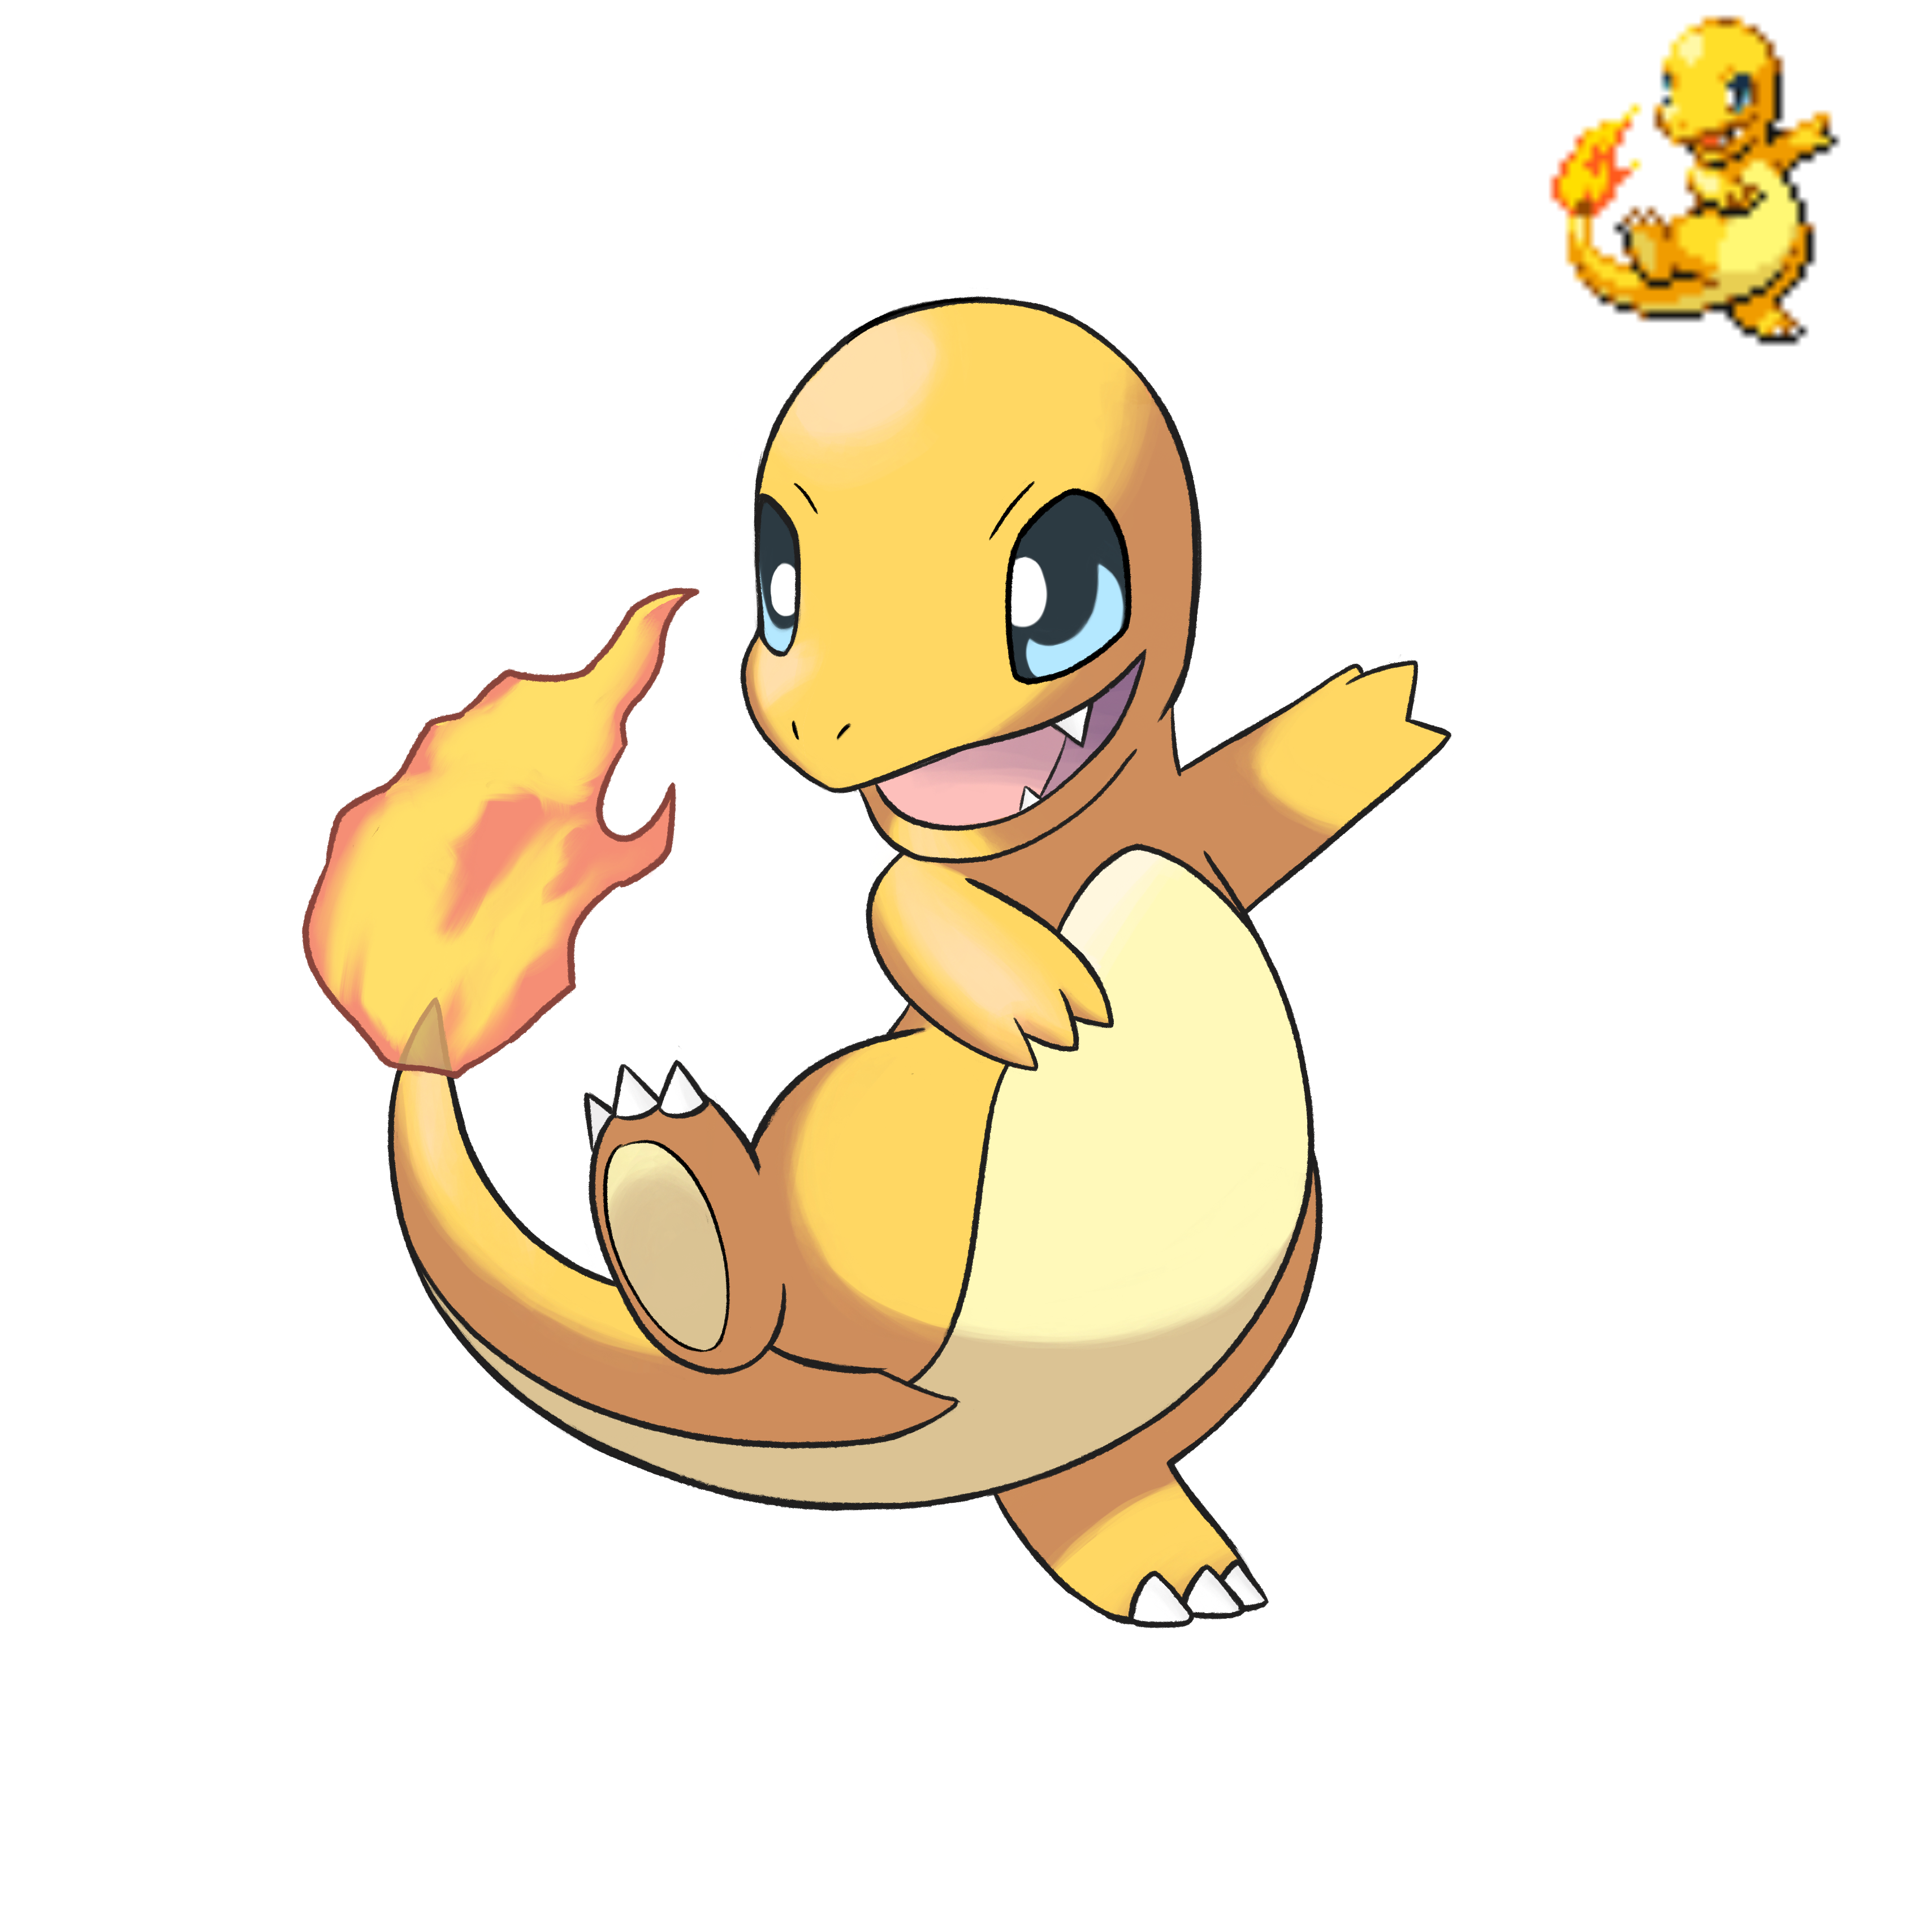 Shiny Charmander Dp Sprite Showcase By Lazoofficial On Deviantart